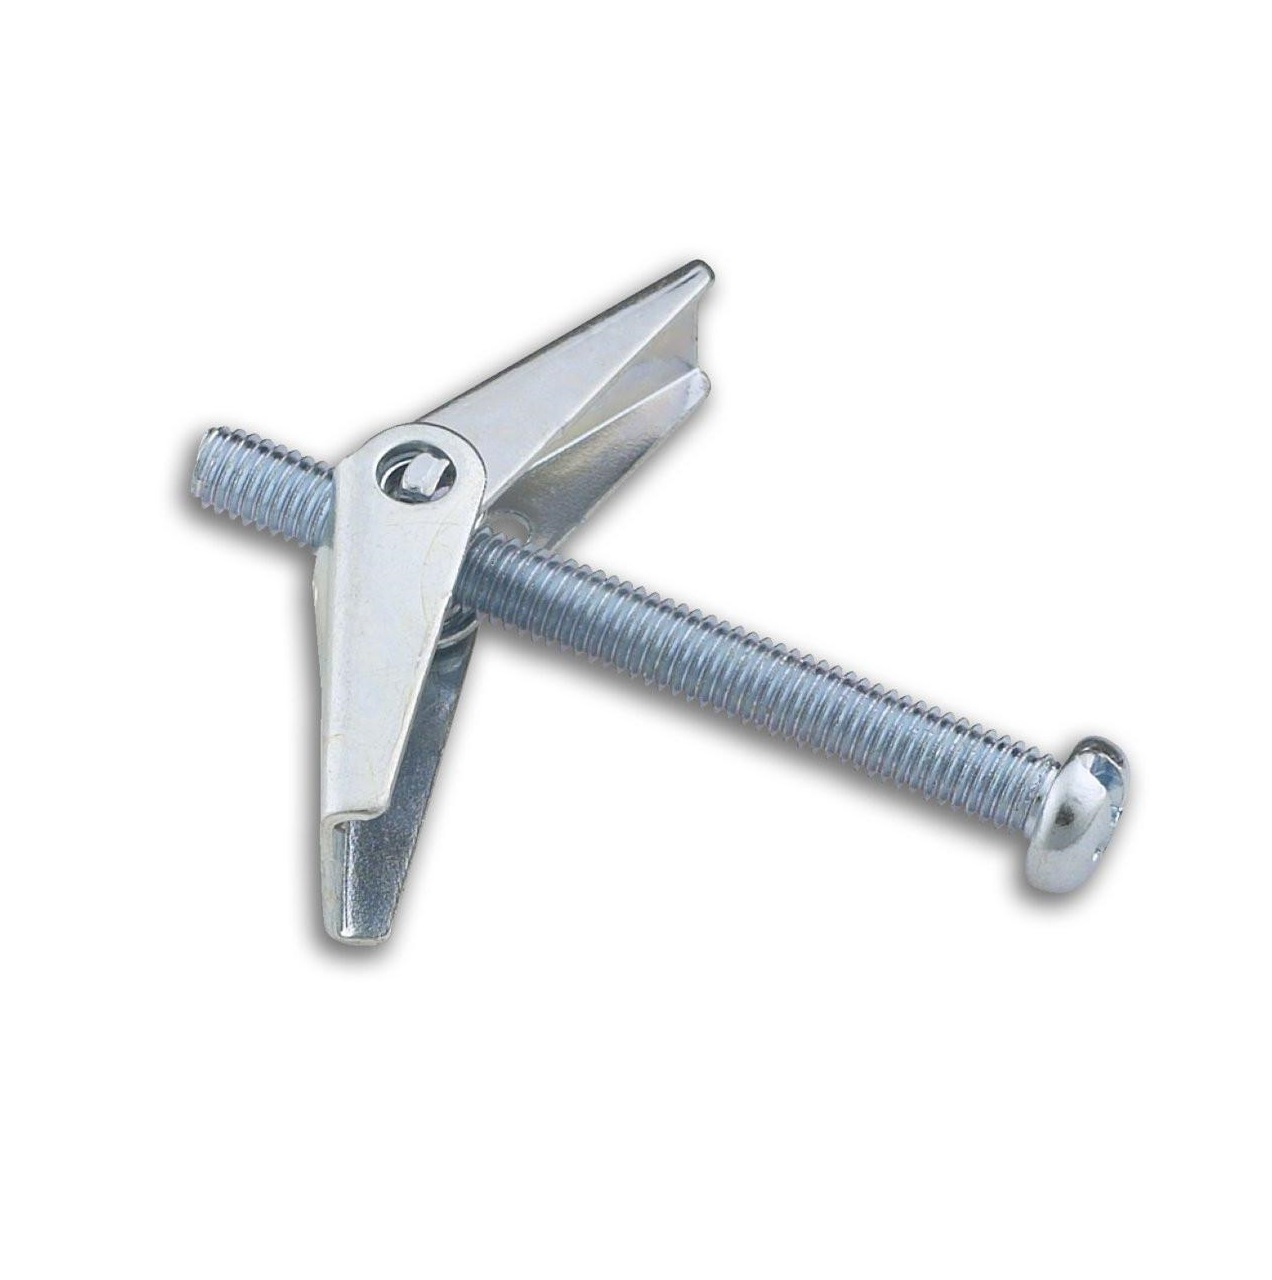 Wing Spring Toggle and Machine Screw for Plasterboard Hollow Walls Doors 3 inch Bulk Hardware BH04752 M6 x 75mm Pack of 4 